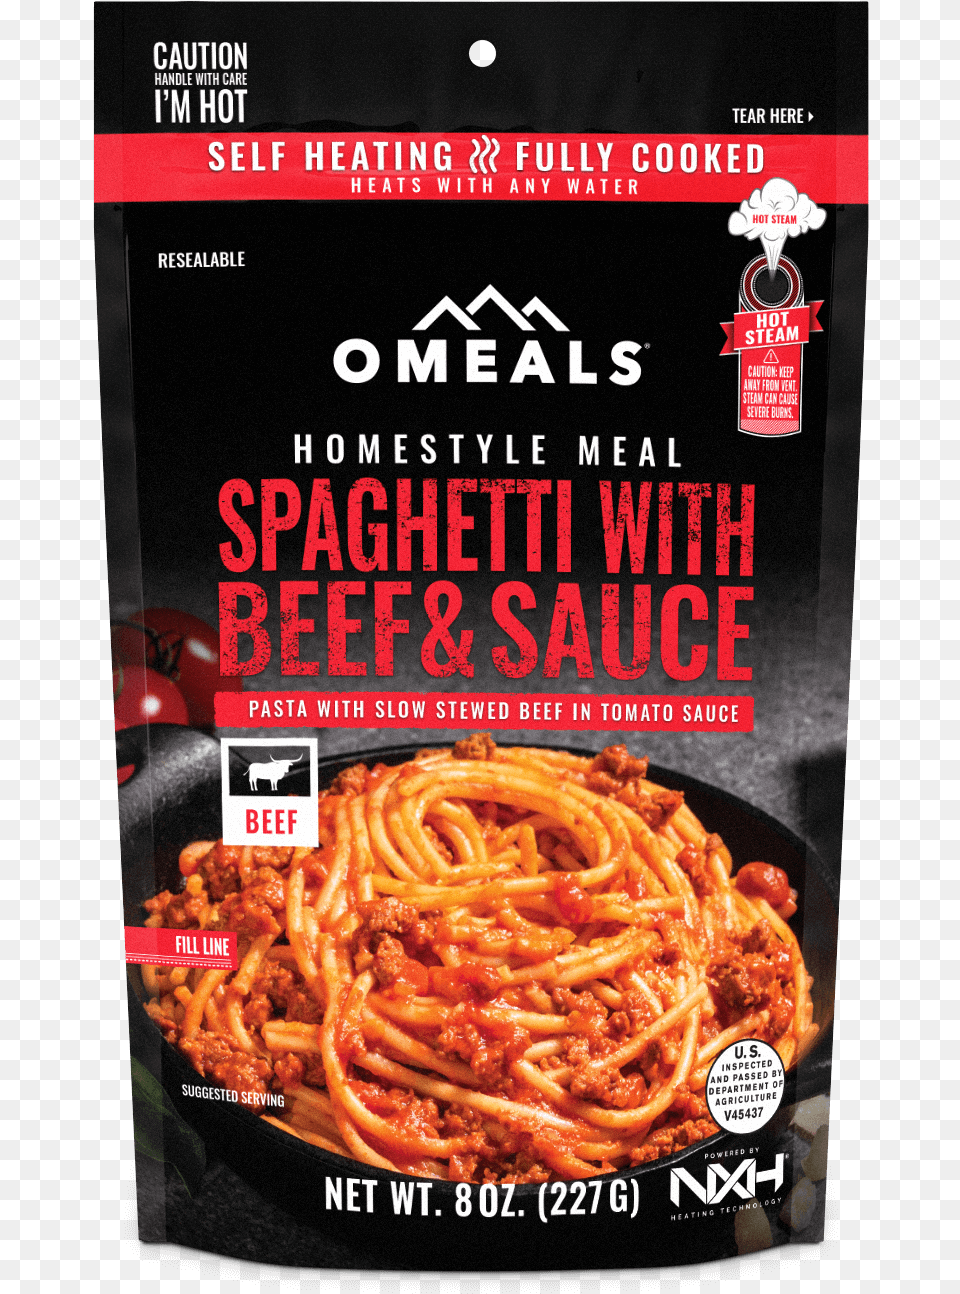 Omeals Spaghetti With Beef And Sauce 6 Omeals, Advertisement, Food, Pasta, Poster Png Image